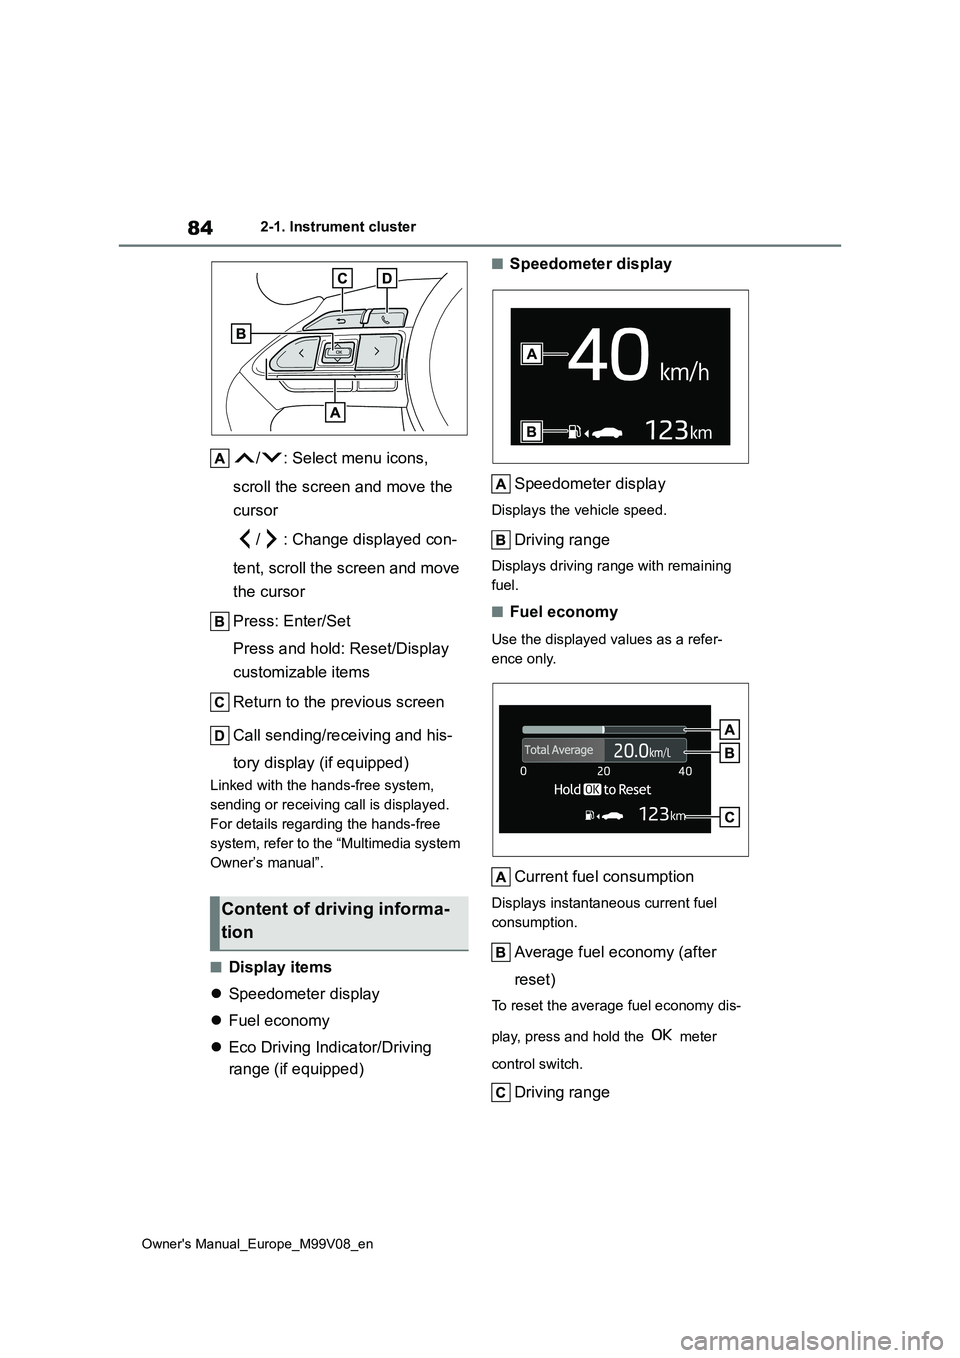 TOYOTA AYGO X 2022  Owners Manual (in English) 84
Owner's Manual_Europe_M99V08_en
2-1. Instrument cluster
/ : Select menu icons,  
scroll the screen and move the  
cursor 
/ : Change displayed con- 
tent, scroll the screen and move  
the curso